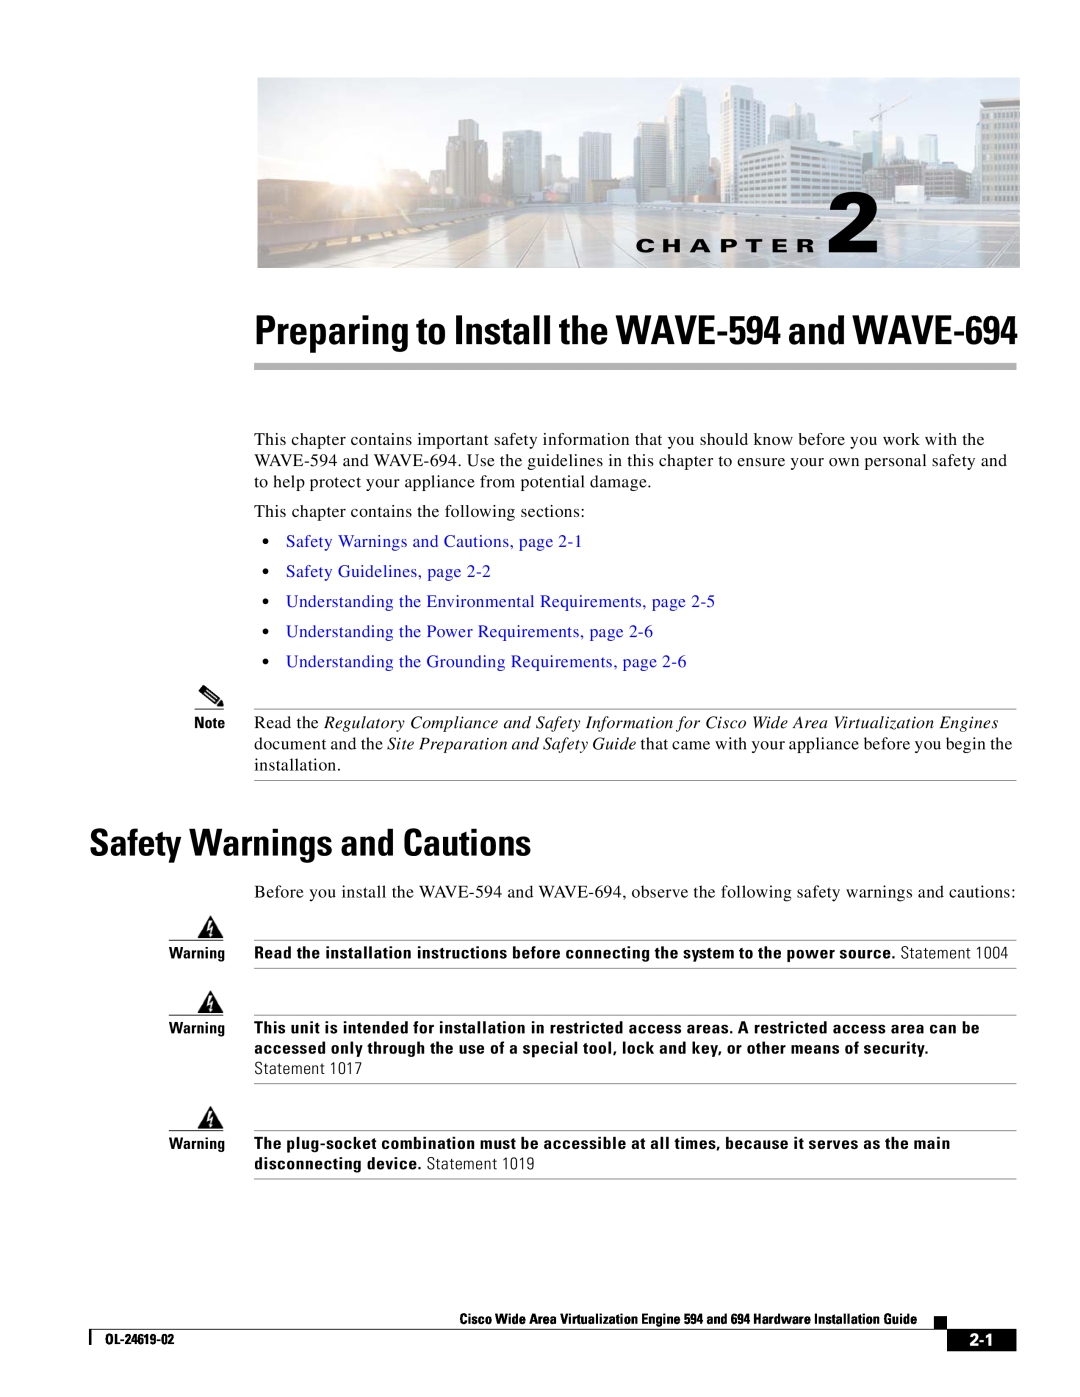 Cisco Systems WAVE594K9 Preparing to Install the WAVE-594 and WAVE-694, Safety Warnings and Cautions, C H A P T E R 